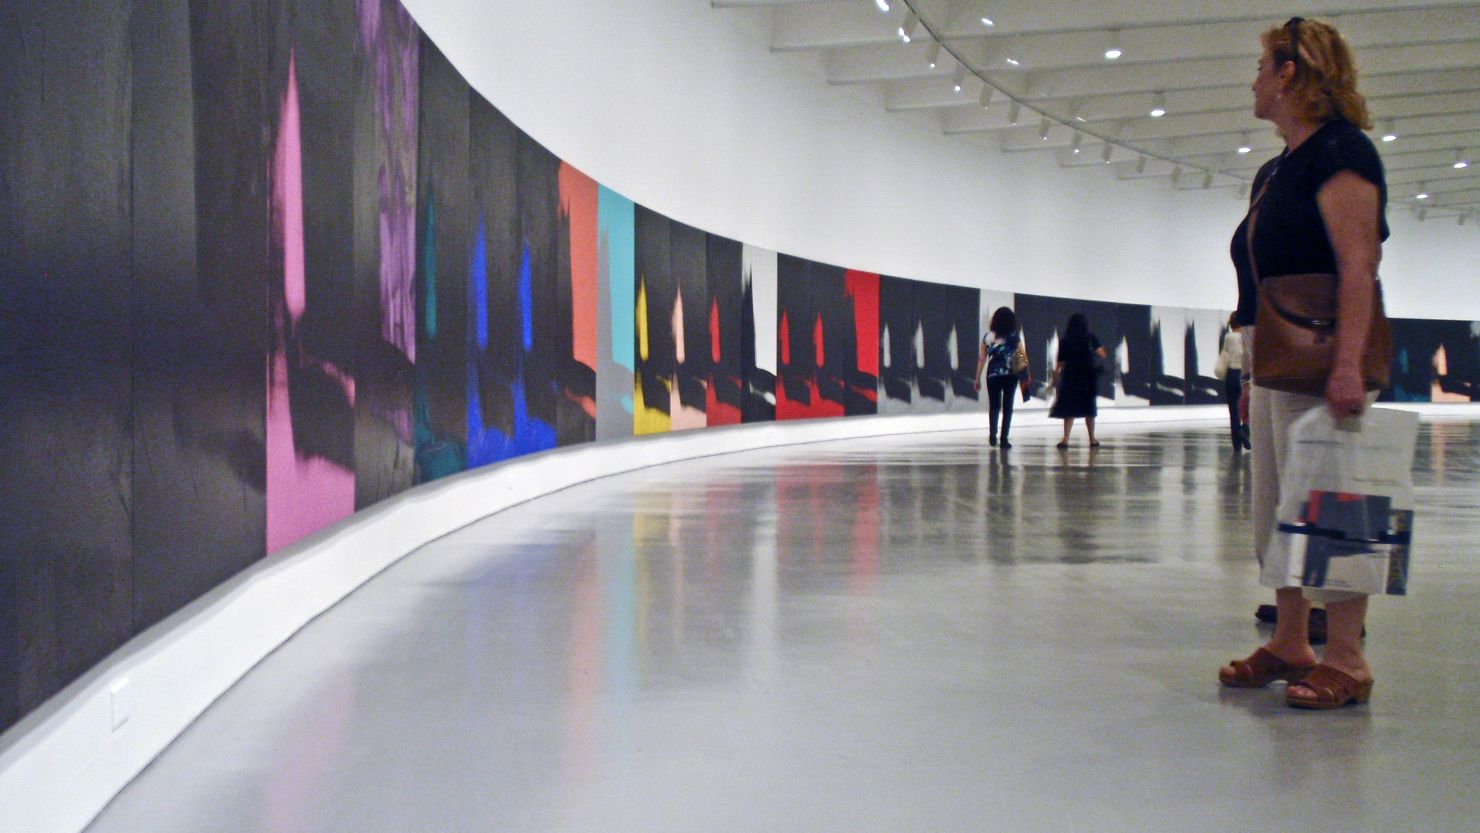 : 	Andy Warhol's painting entitled "Shadows" is longer than a football field. It's currently at the Smithsonian's Hirshhorn Museum. "Shadows" is 450 feet long and it marks the first time all of Warhol's 102 abstract "shadows" series have been shown together, as he intended.